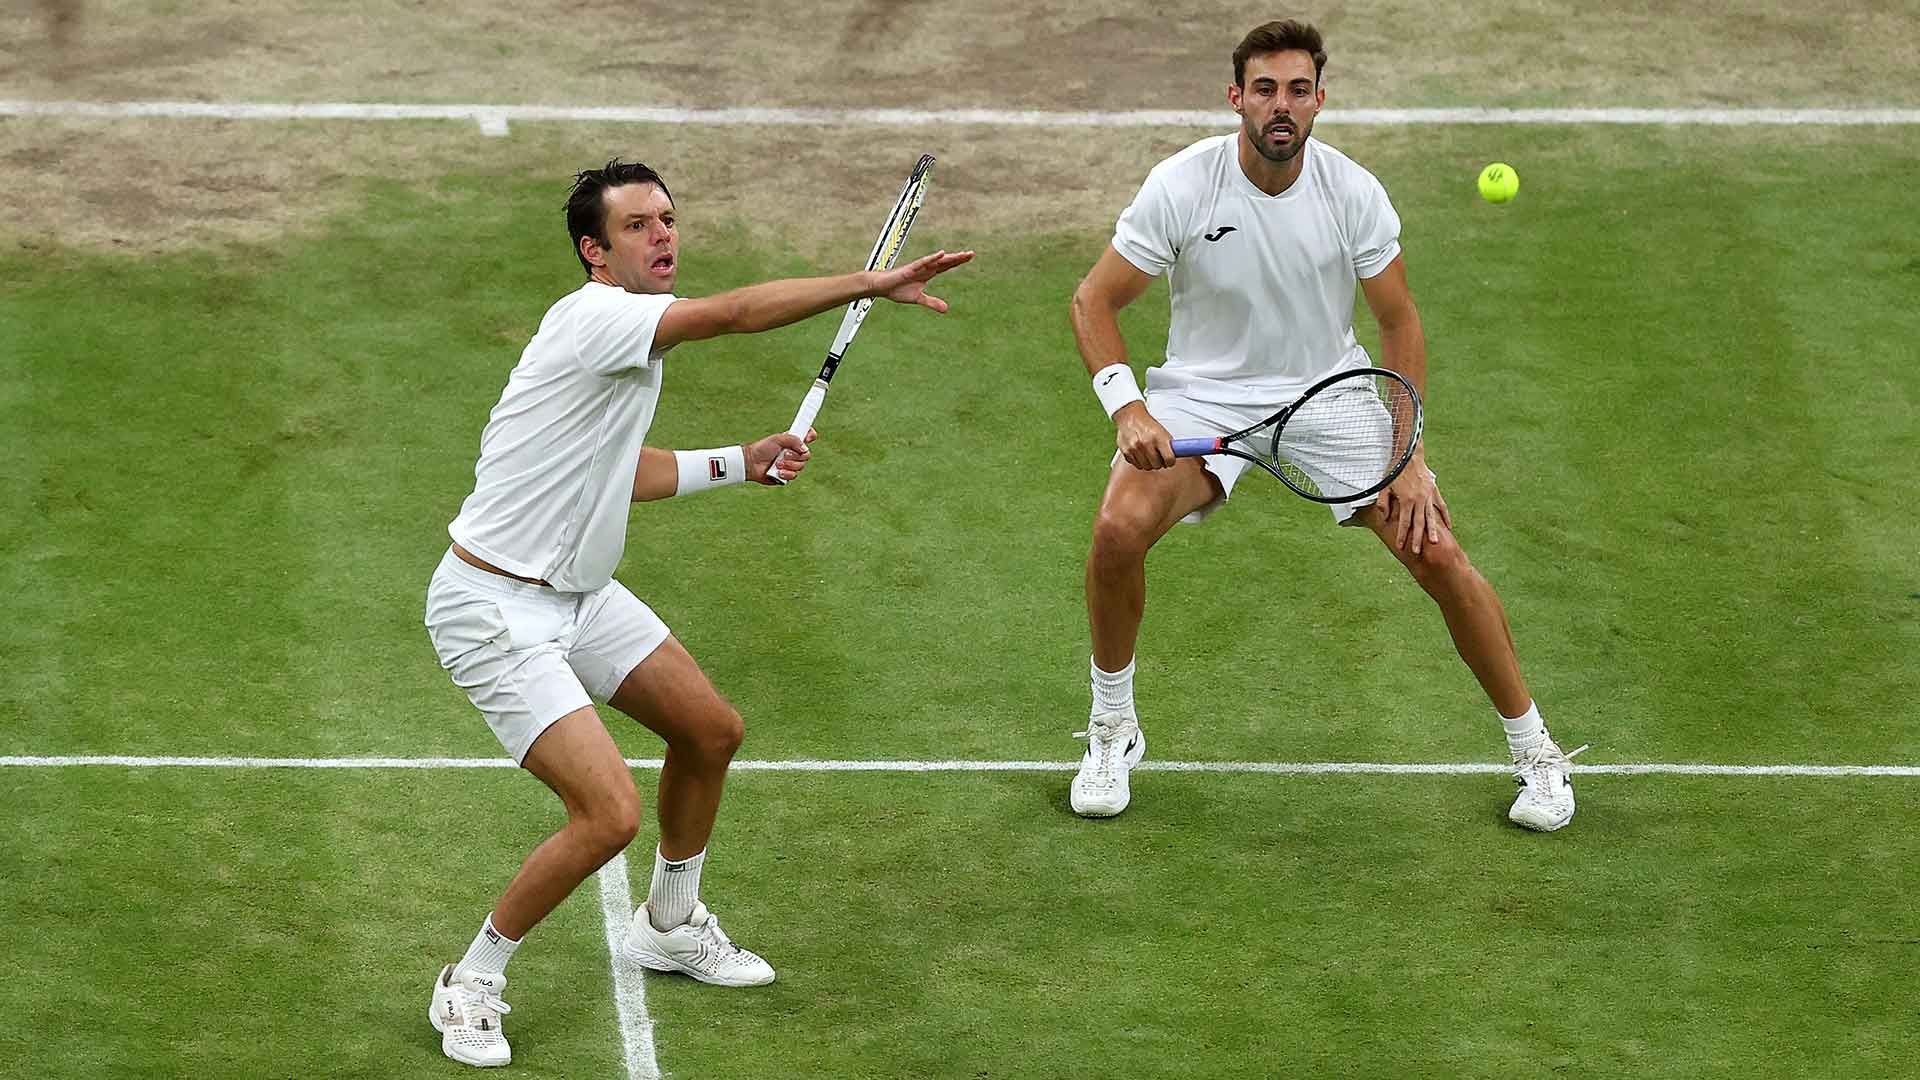 Horacio Zeballos and Marcel Granollers are chasing their first major together (file photo).